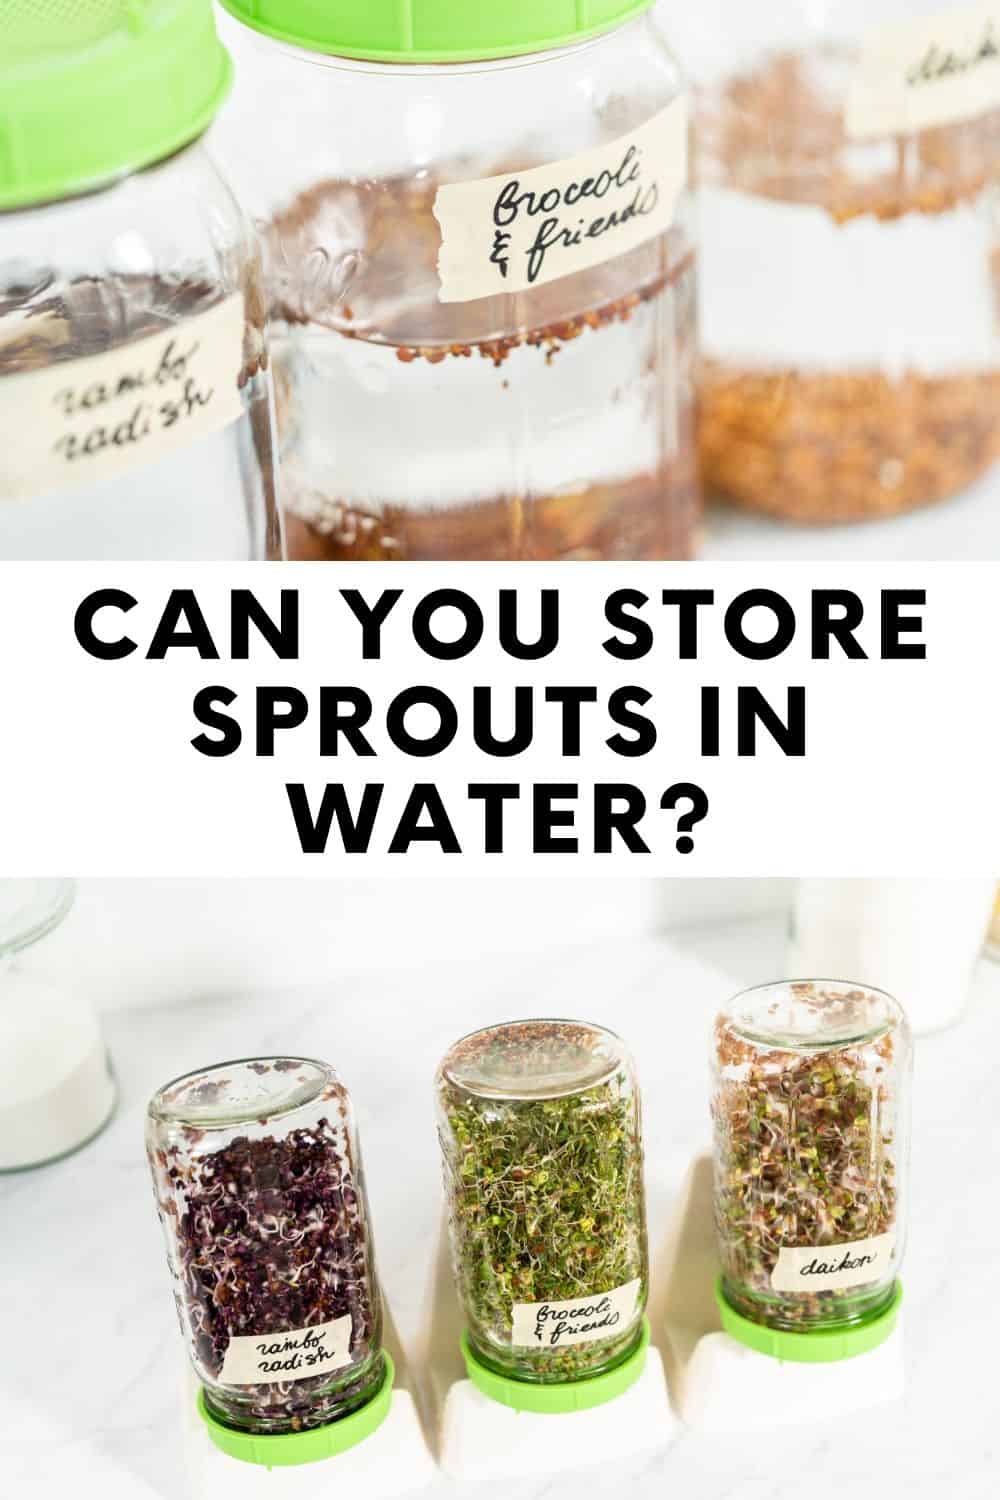 Sprouts: Can they be stored in water?